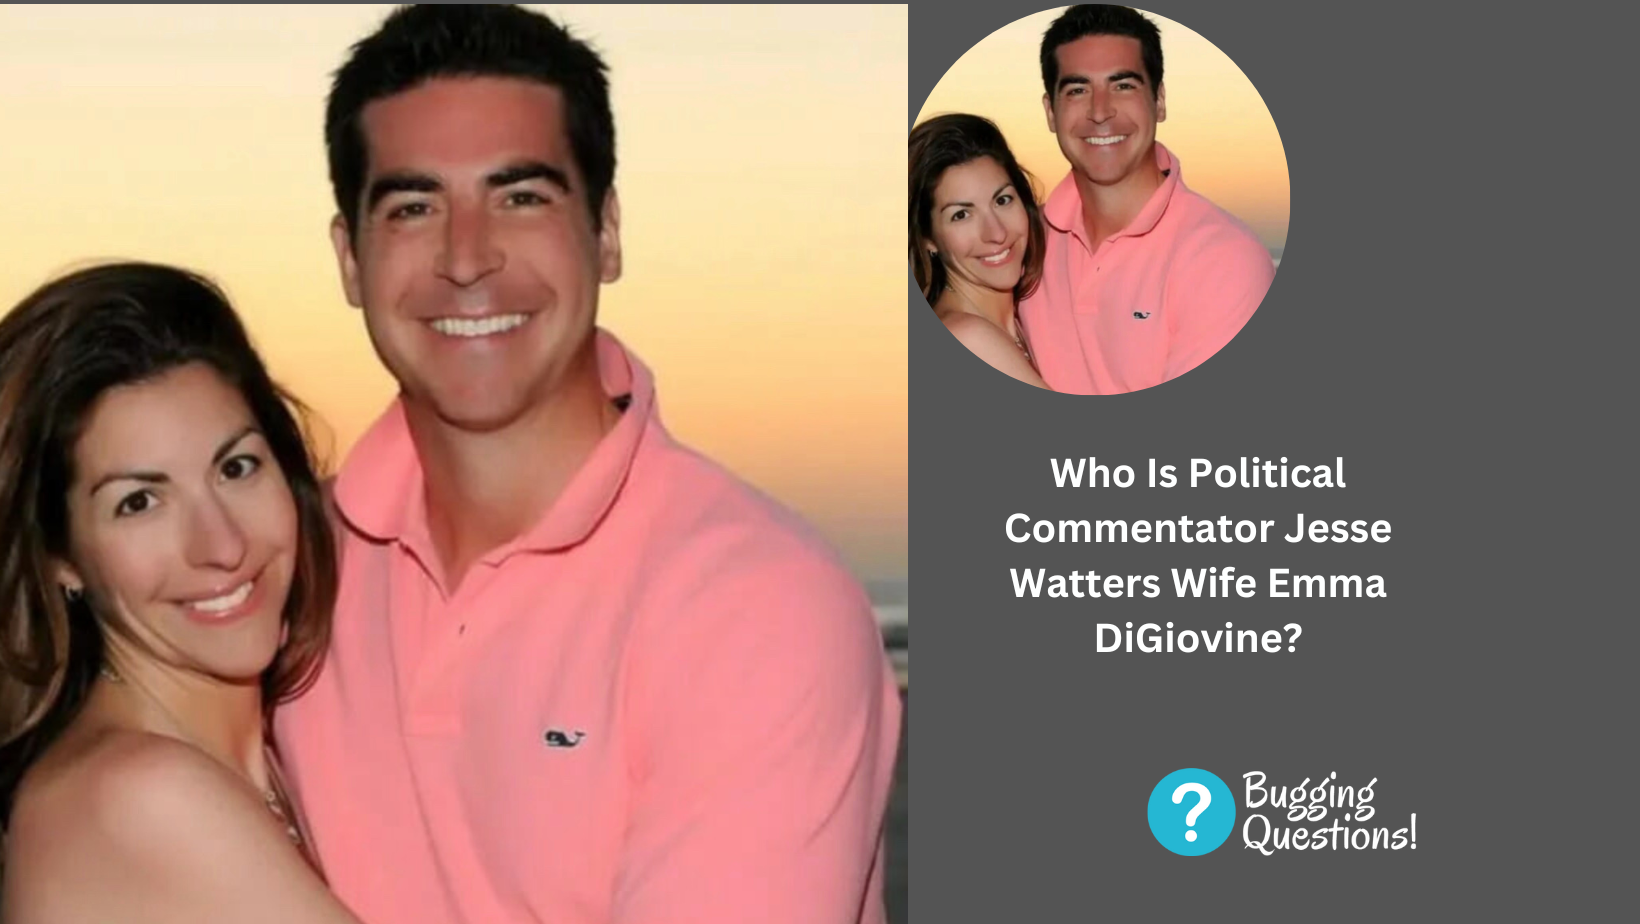 Who Is Political Commentator Jesse Watters Wife Emma DiGiovine?